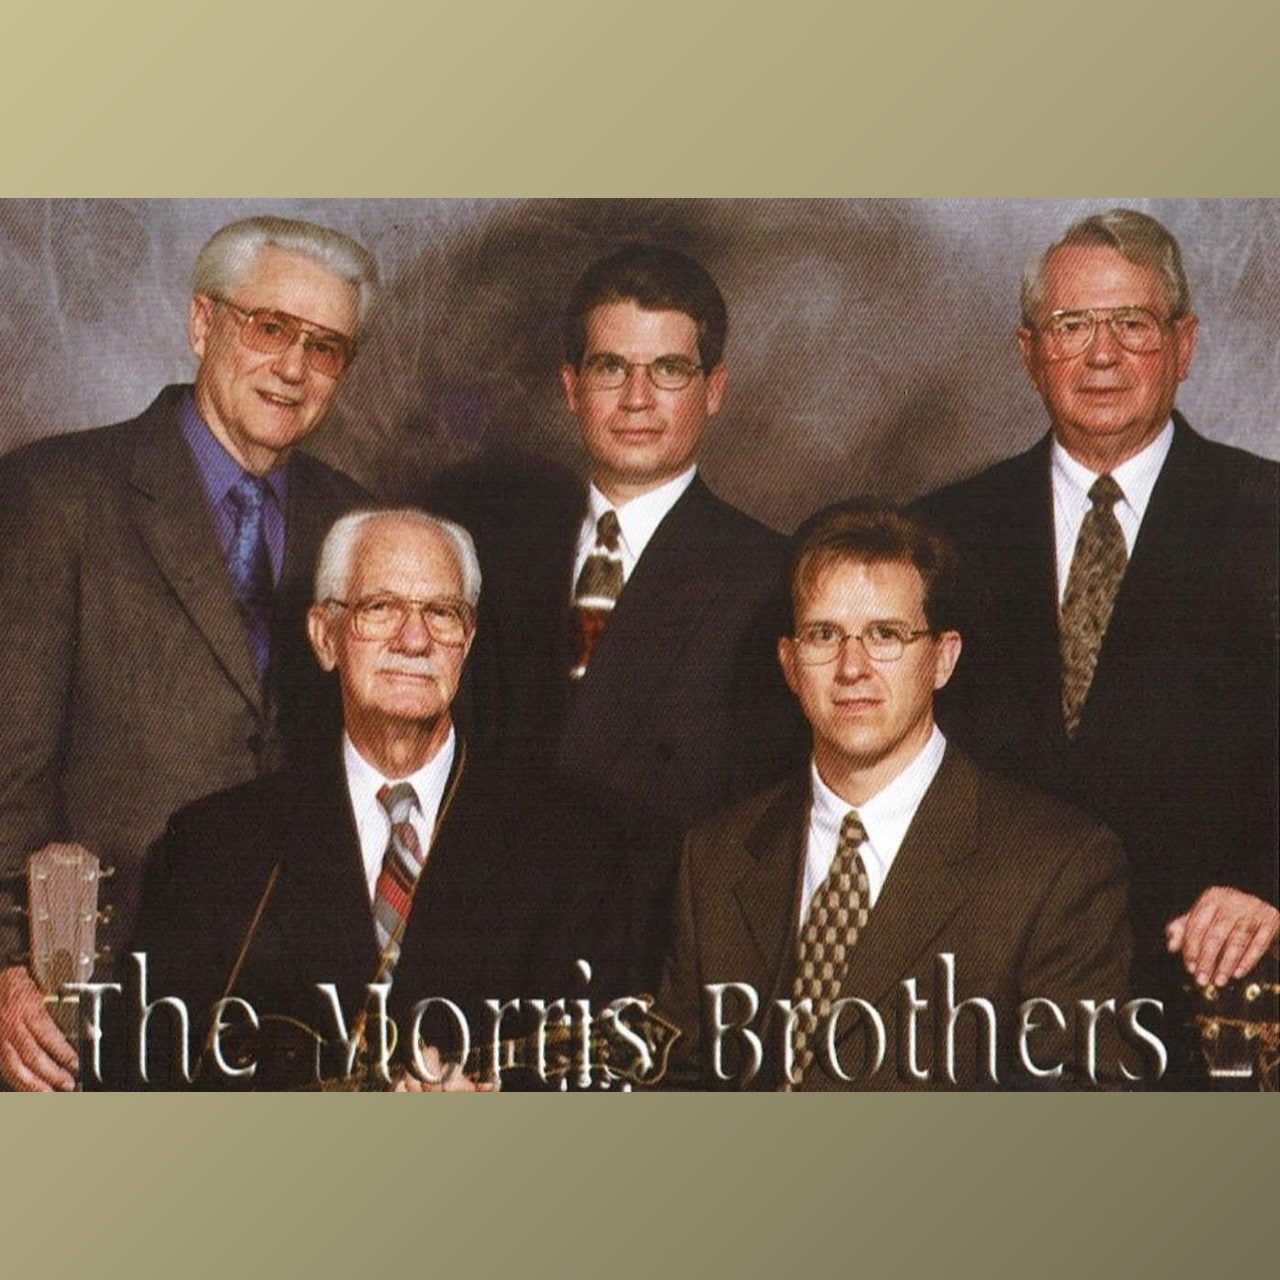 Morris Brothers